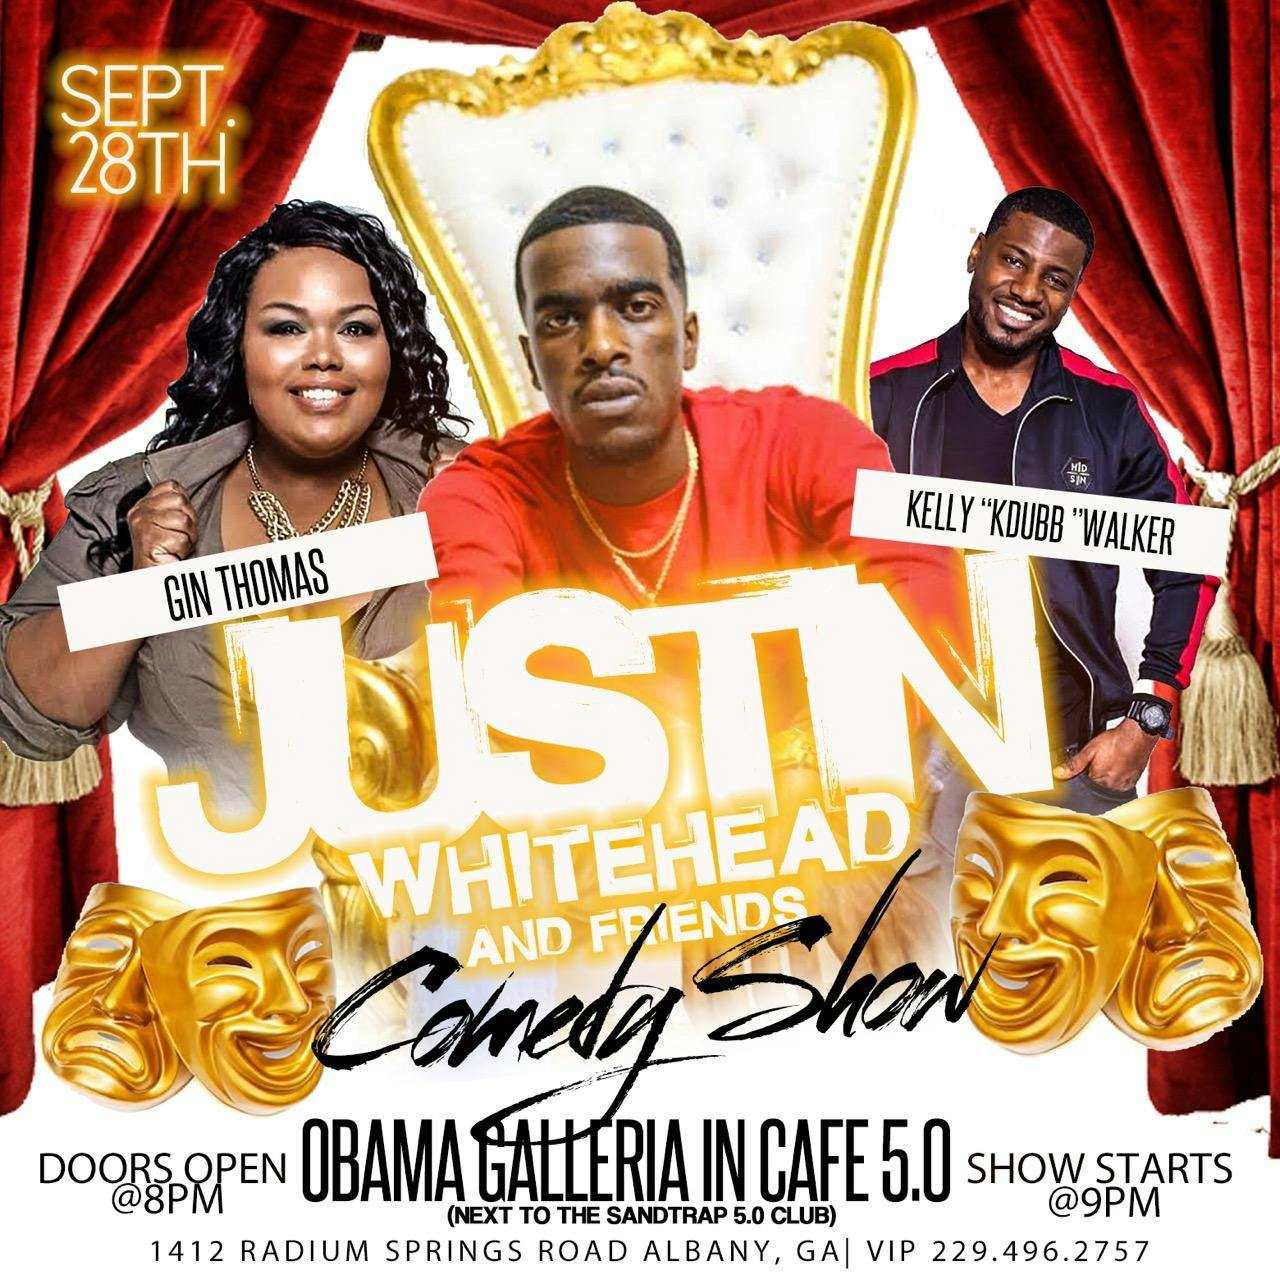 Justin Whitehead & Friends Comedy Show!!!